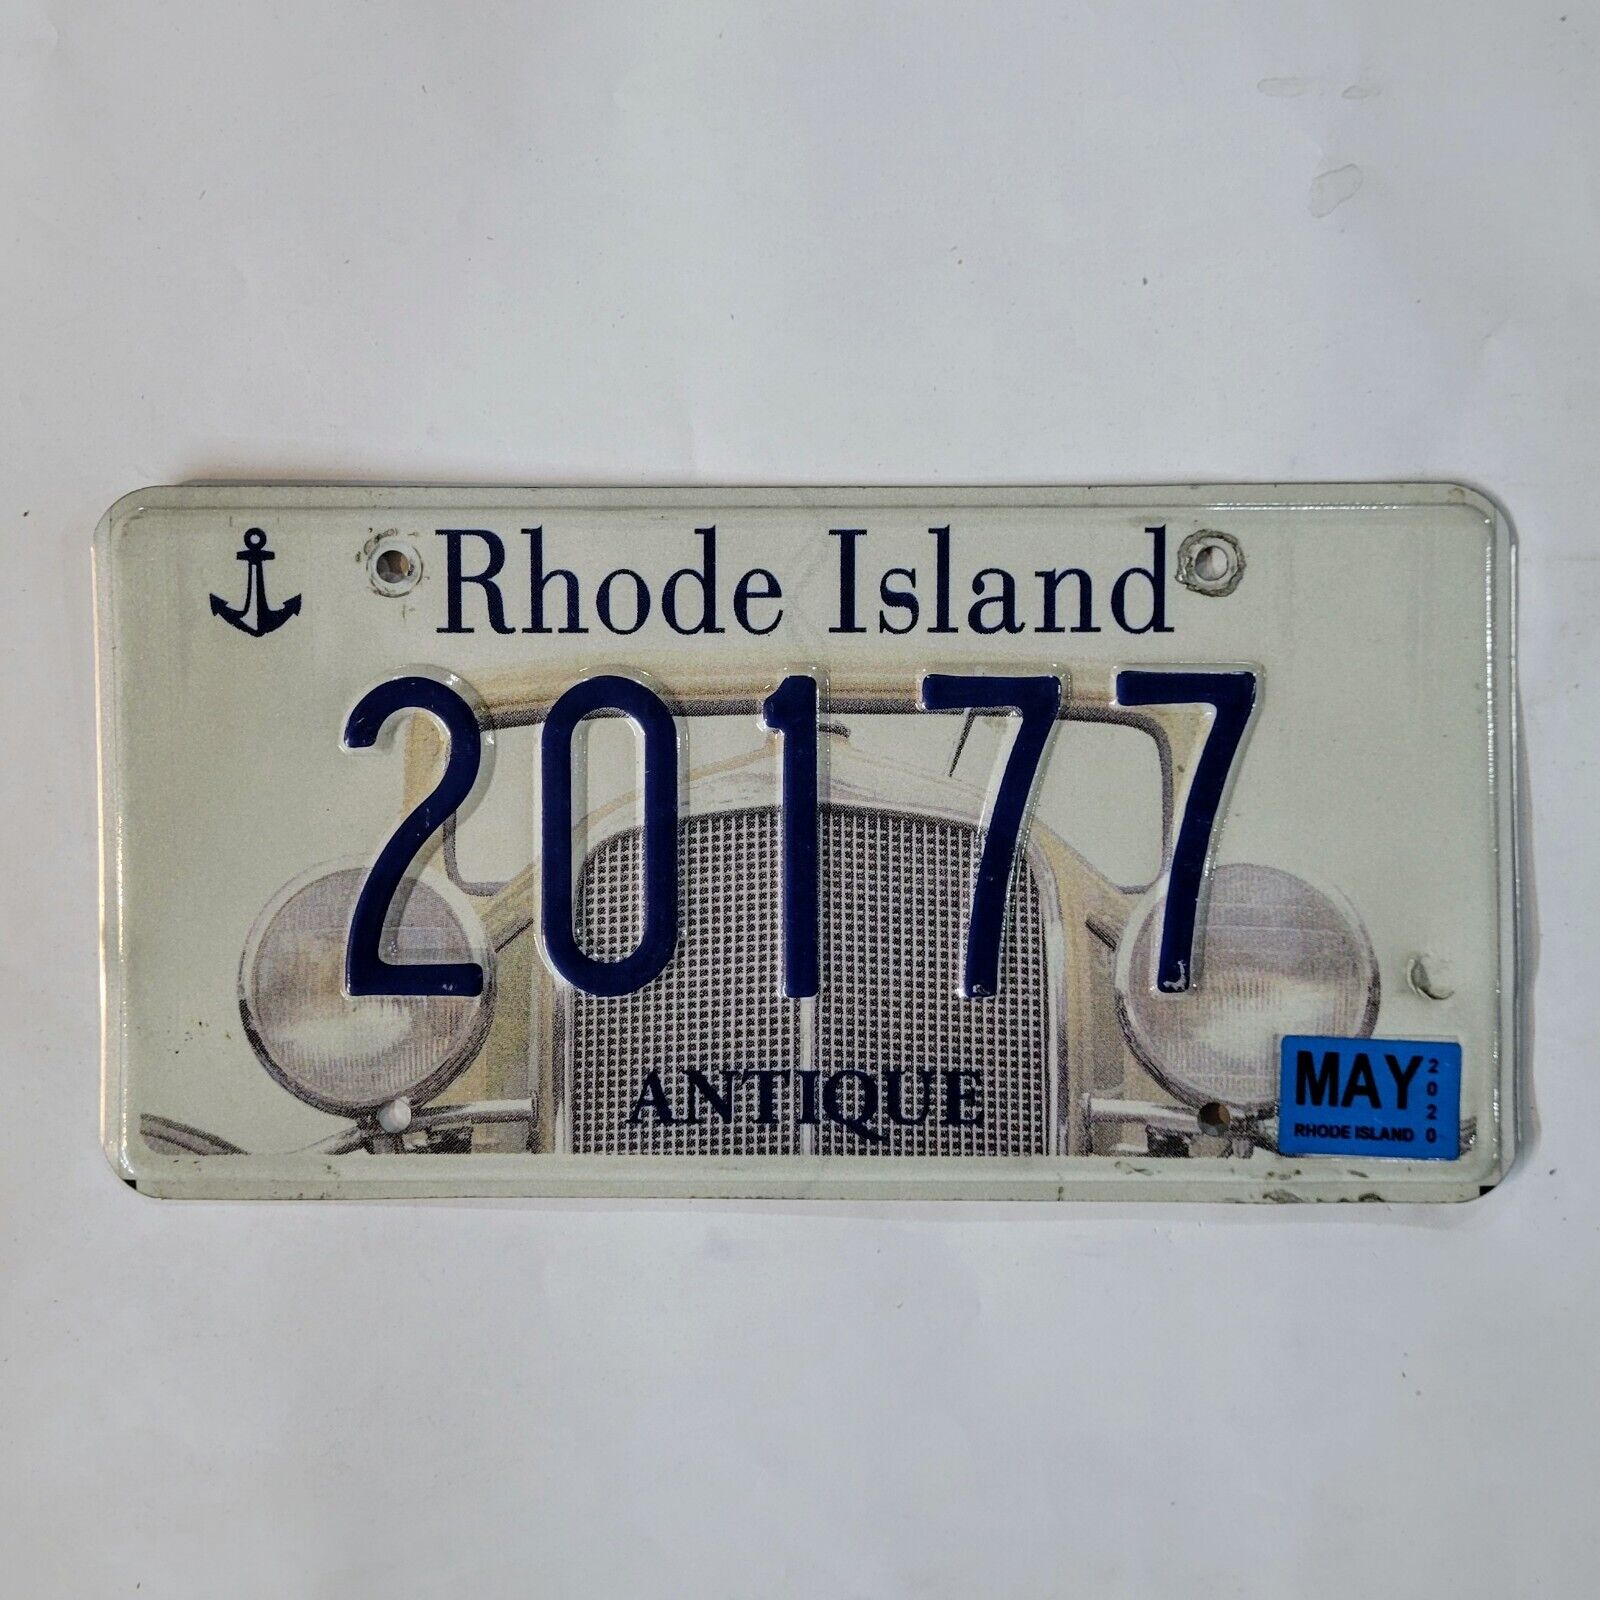 RHODE ISLAND LICENSE PLATE 🔥FREE SHIPPING🔥 ANTIQUE CLASSIC CAR GRAPHIC ~ 20177